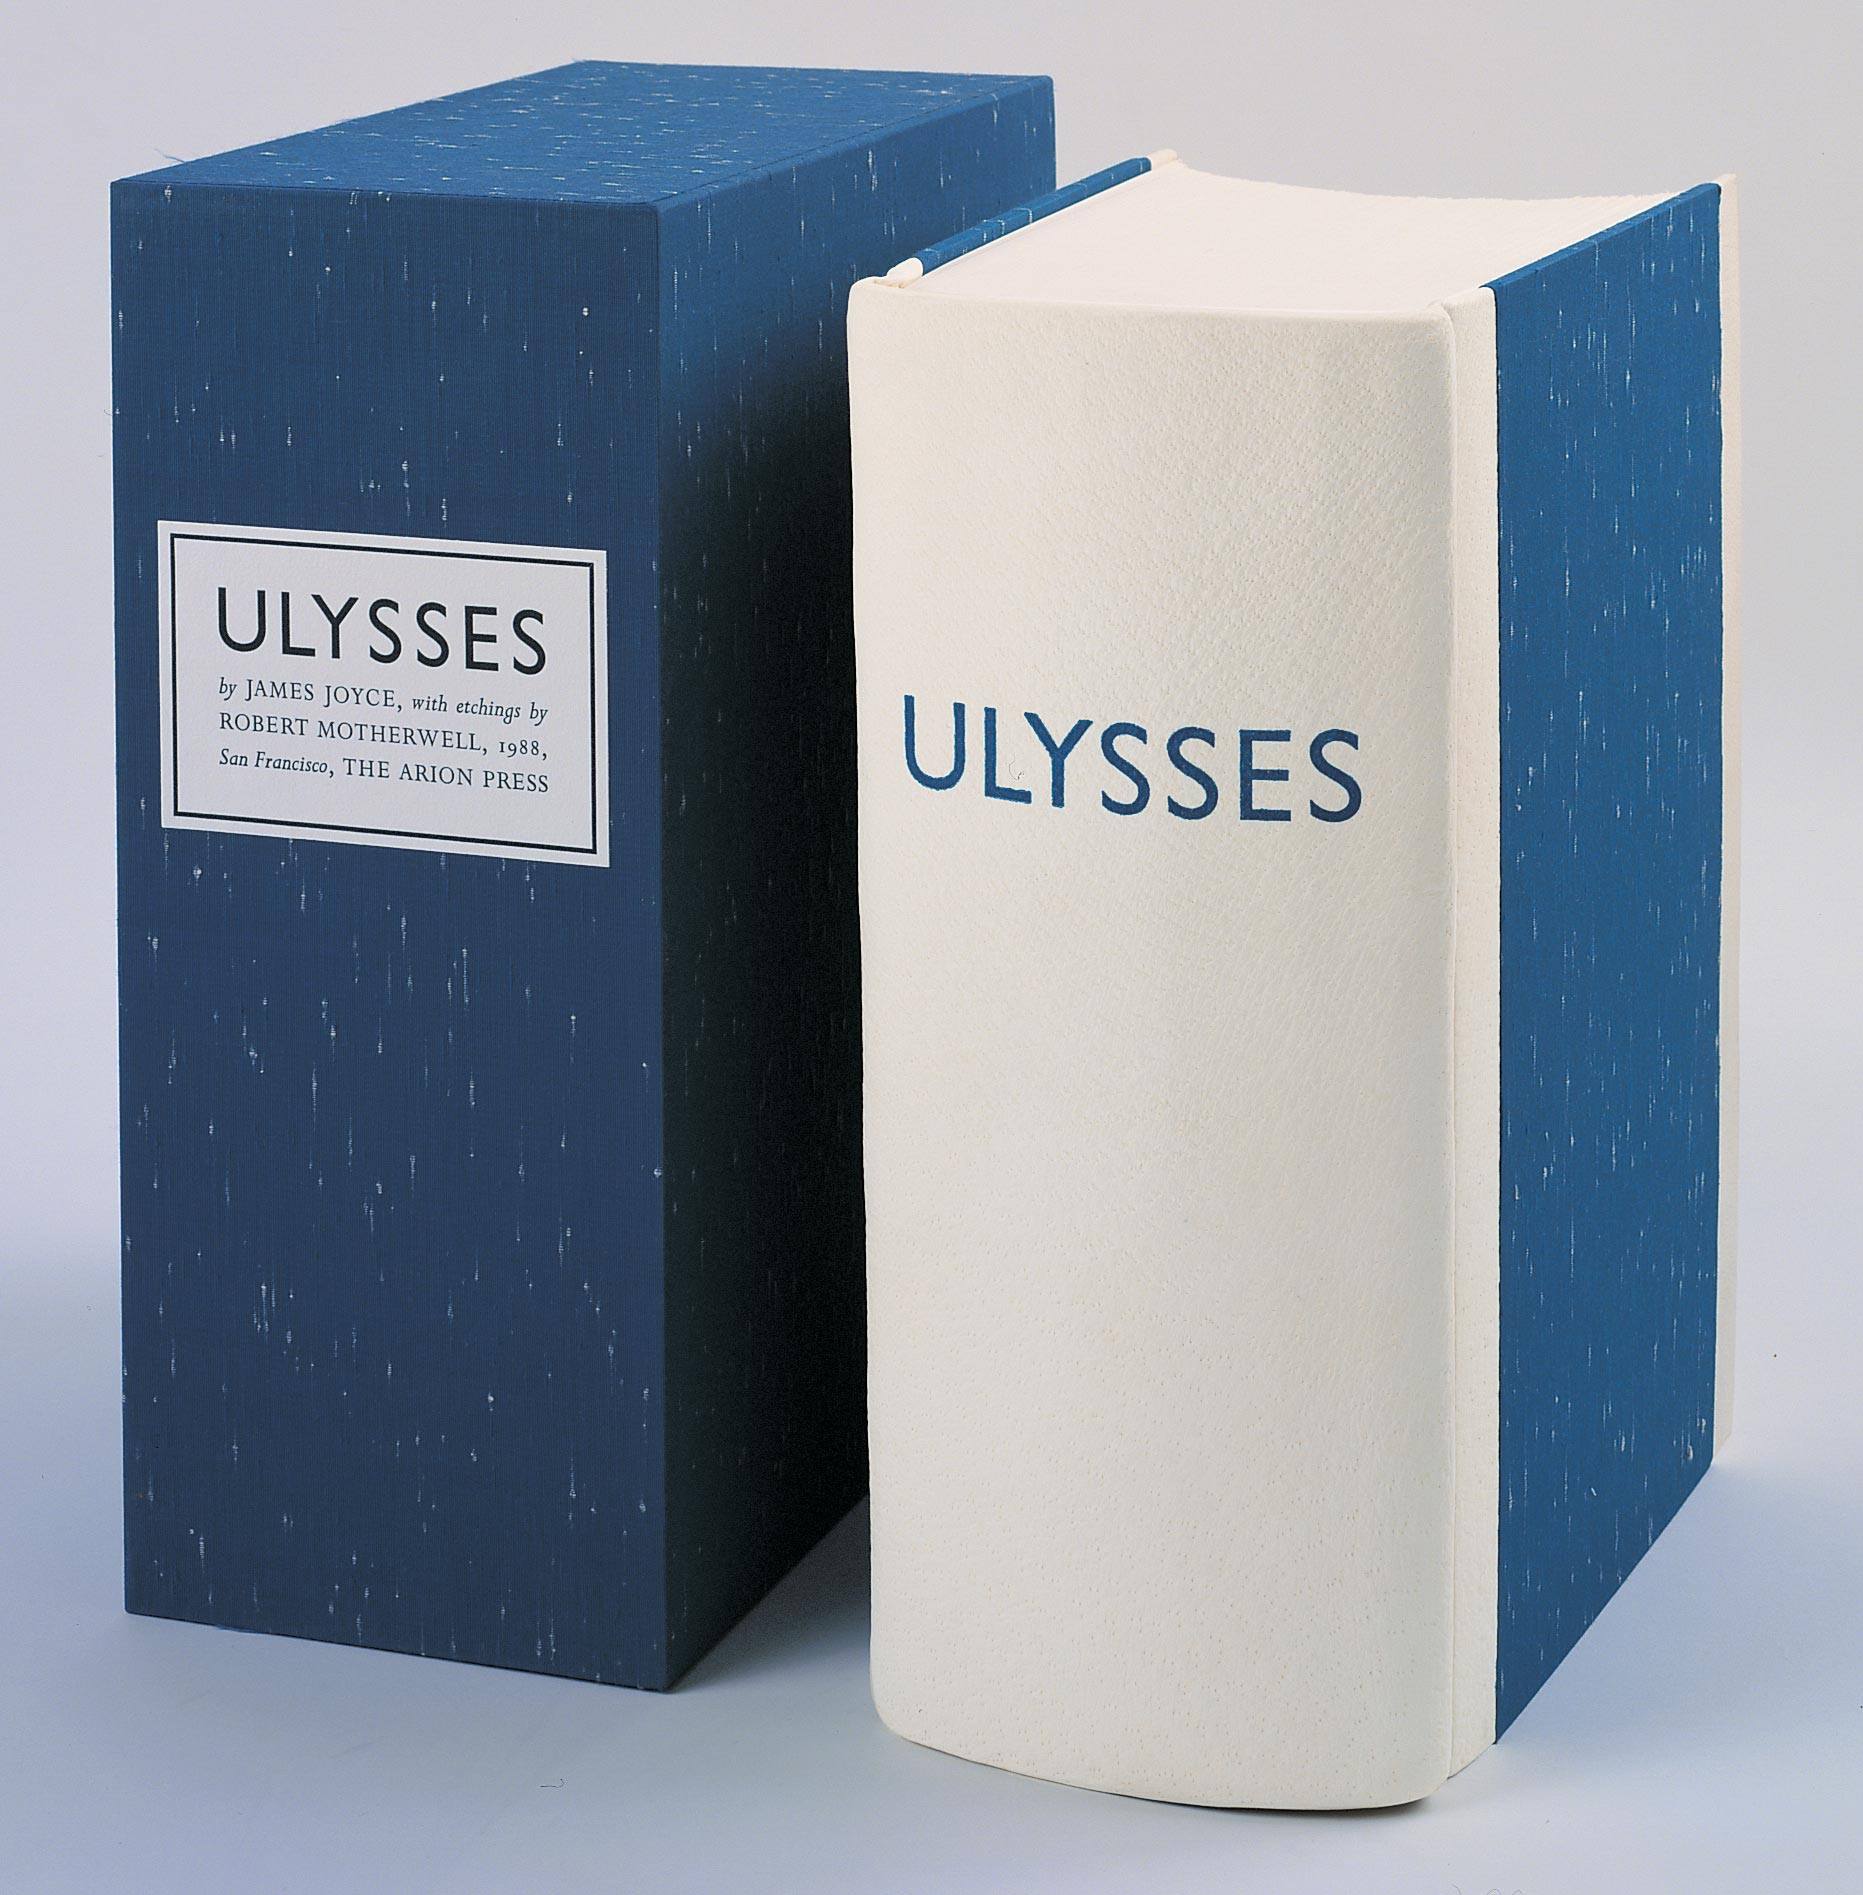 a publication of Ulysses with illustrations by Robert Motherwell